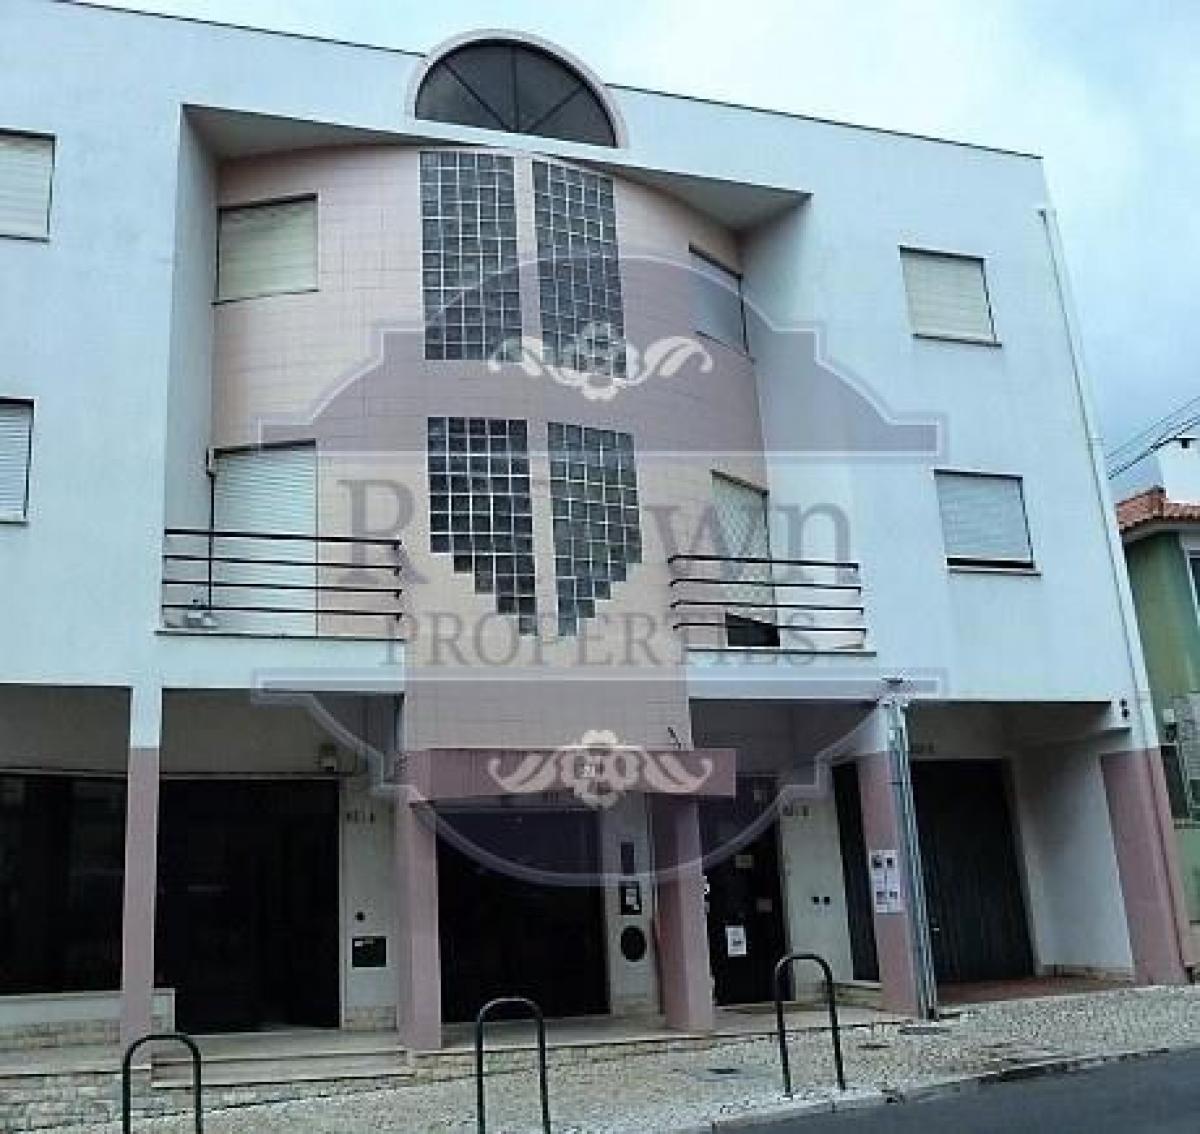 Picture of Office For Sale in Cascais, Estremadura, Portugal